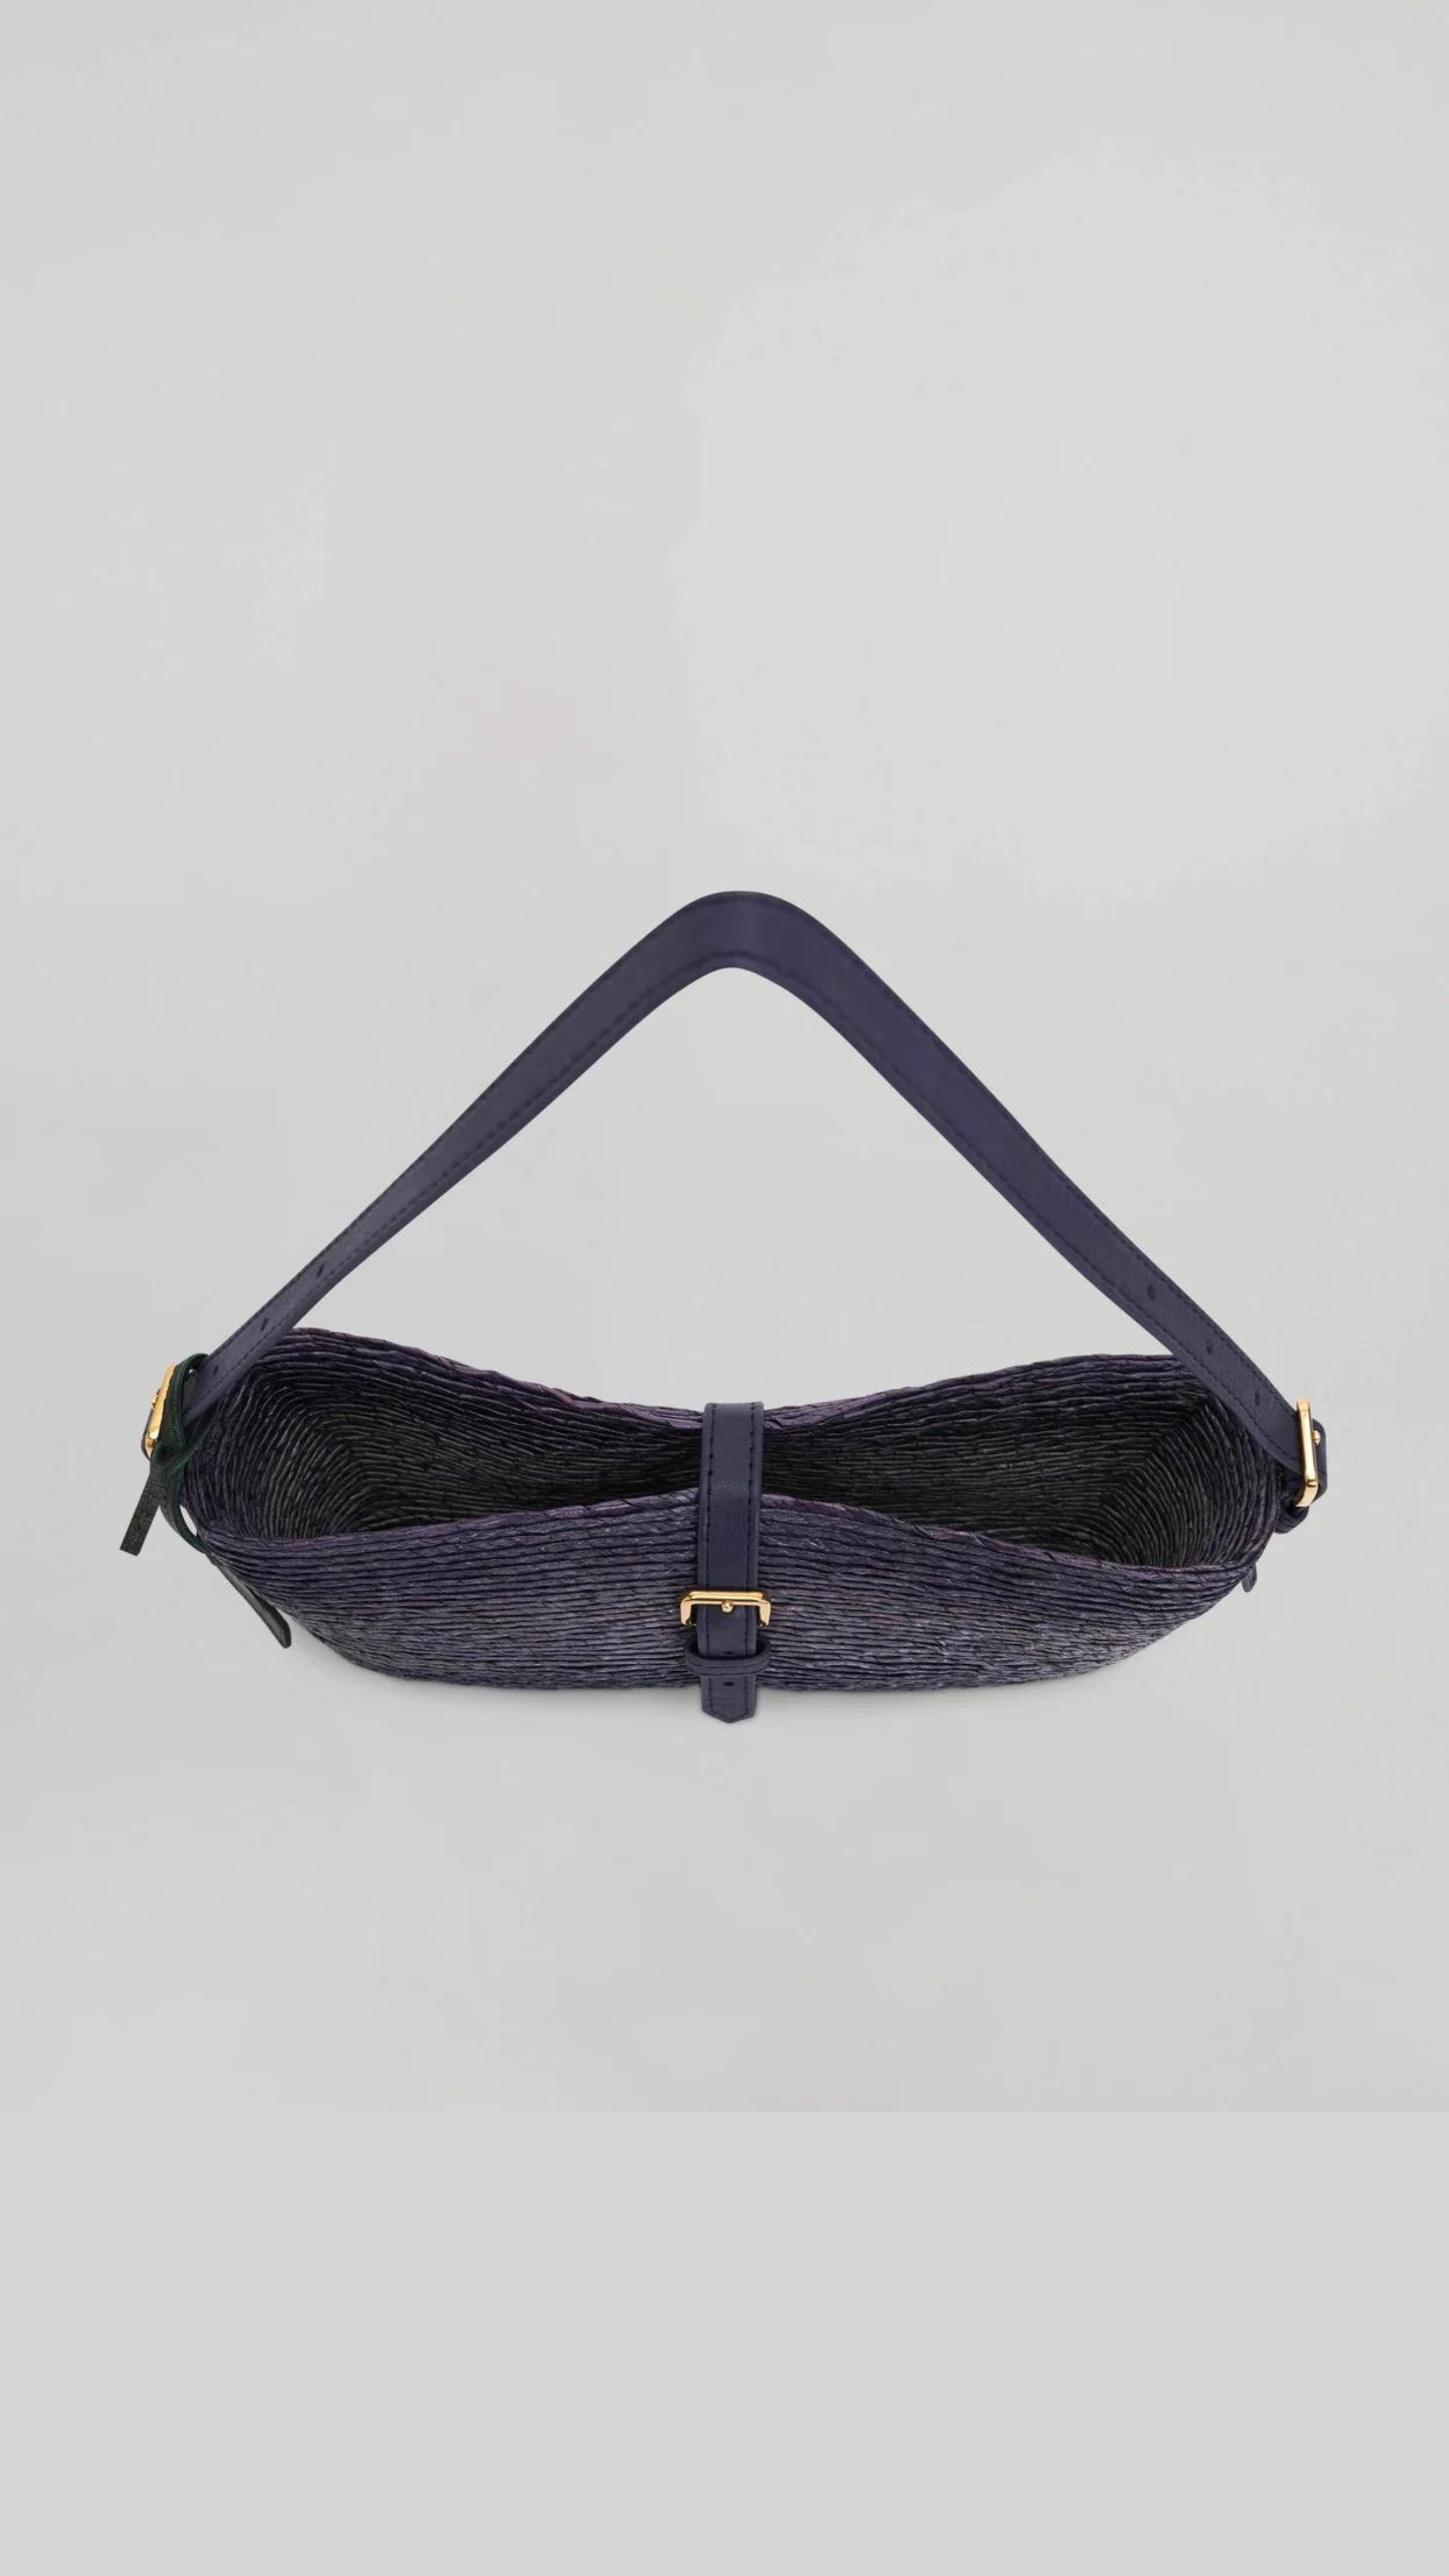 Altruzarra WATERMILL SHOULDER BAG in Murex. Raffia summer purse in deep blue tones and navy blue leather detailing and gold hardware. Adjustable strap for shoulder or long length. Shown from the top view. Available at Experience 27 Madrid Spain.